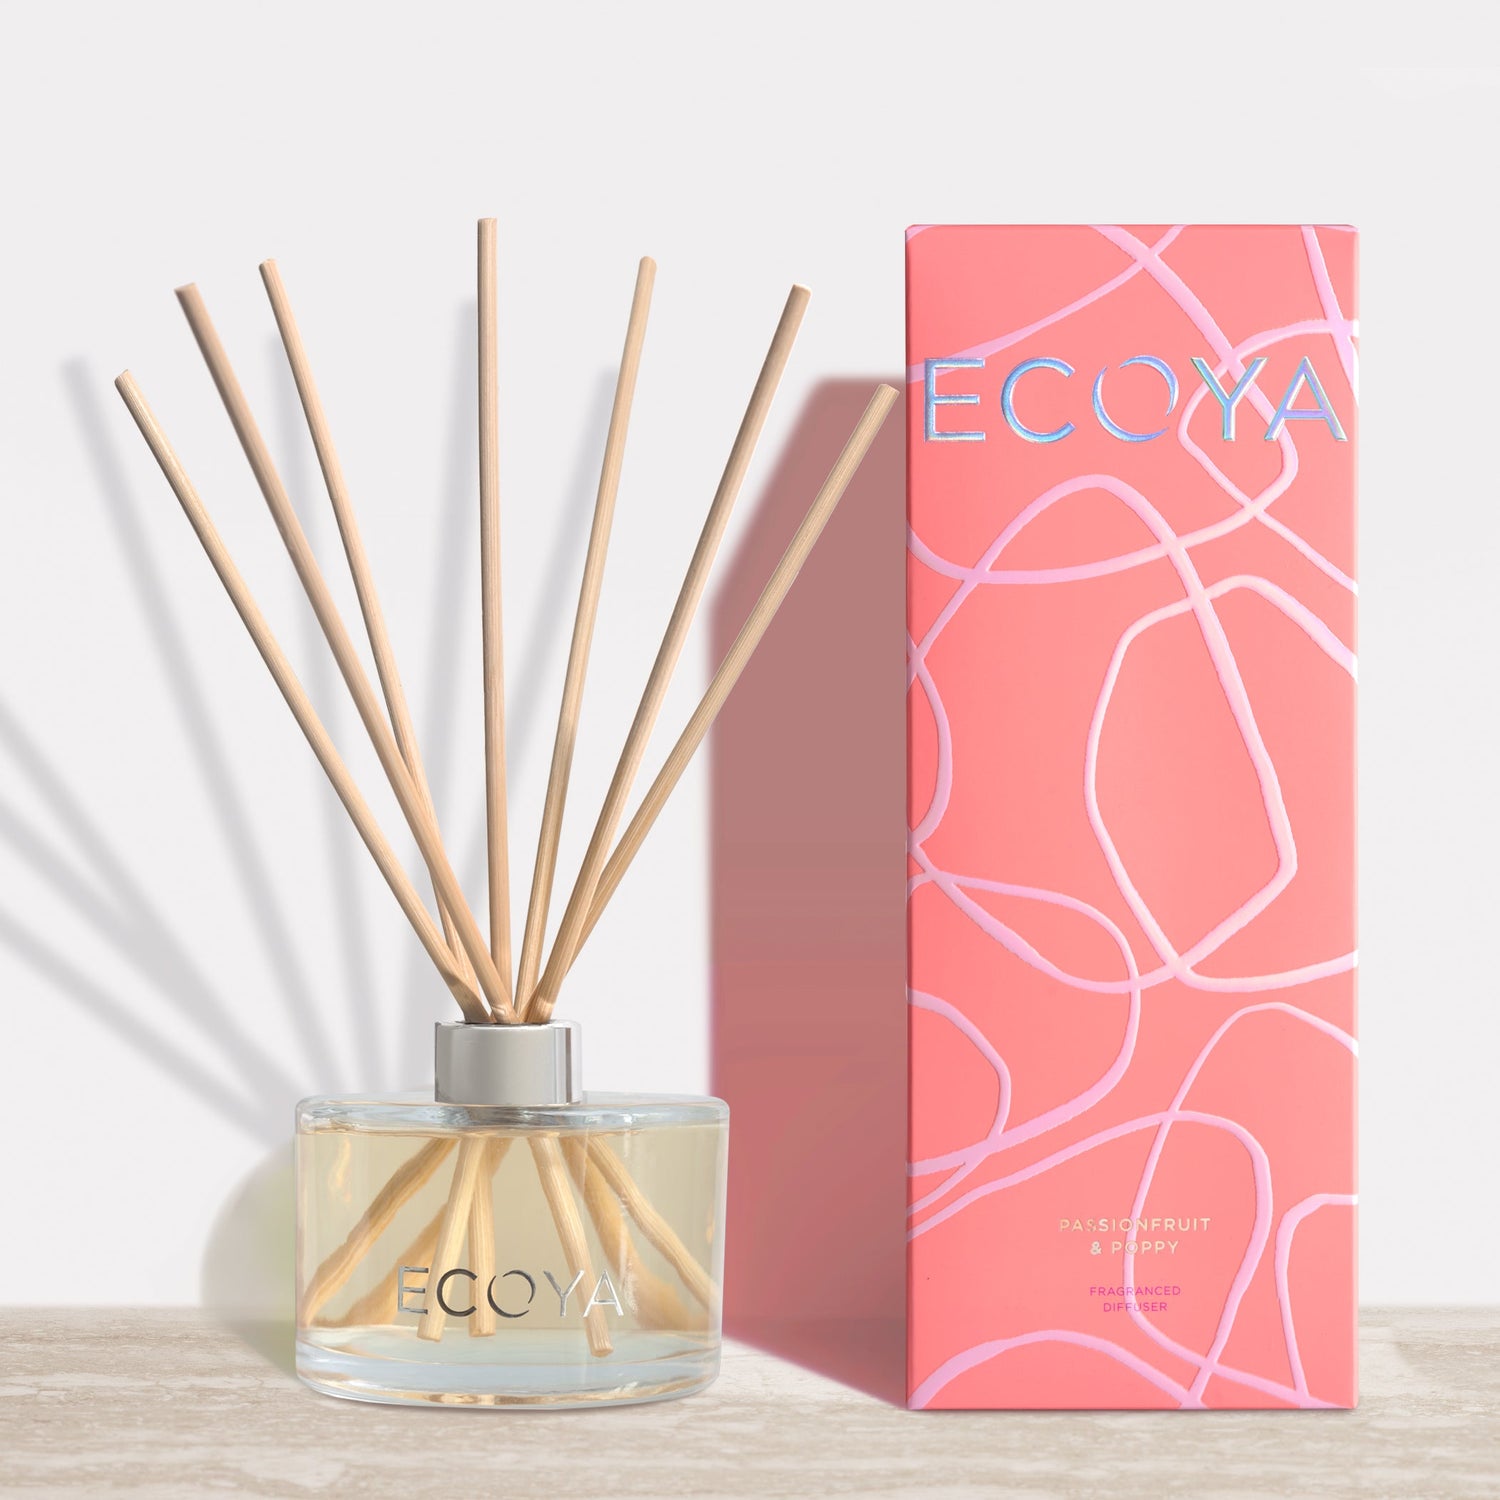 Passionfruit & Poppy Fragranced Diffuser Resort Collection